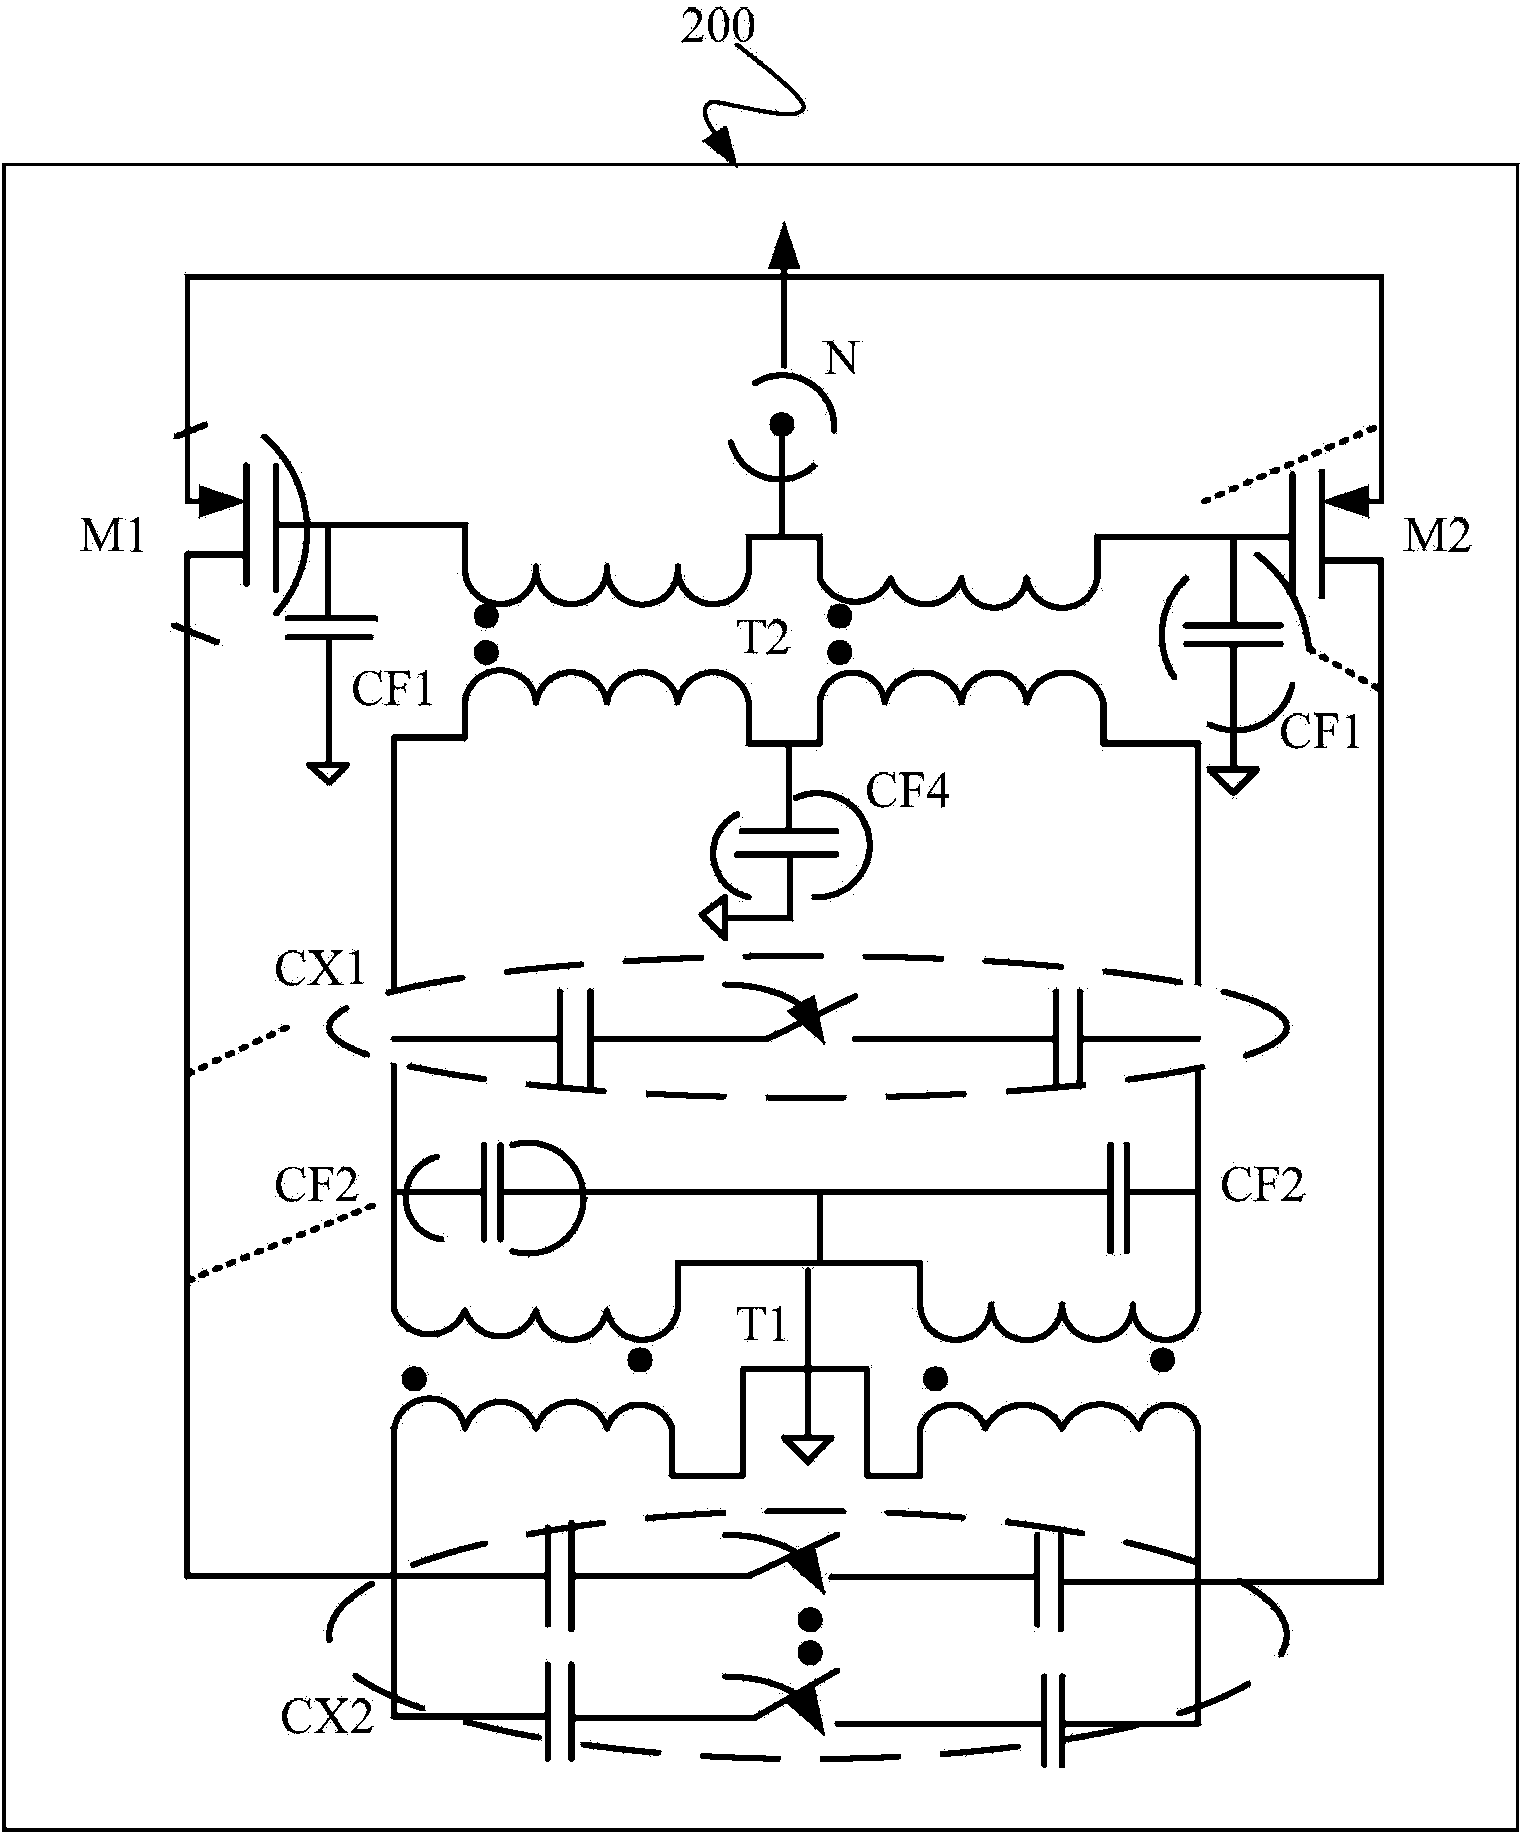 Lc oscillator with tail current source and transformer-based tank circuit